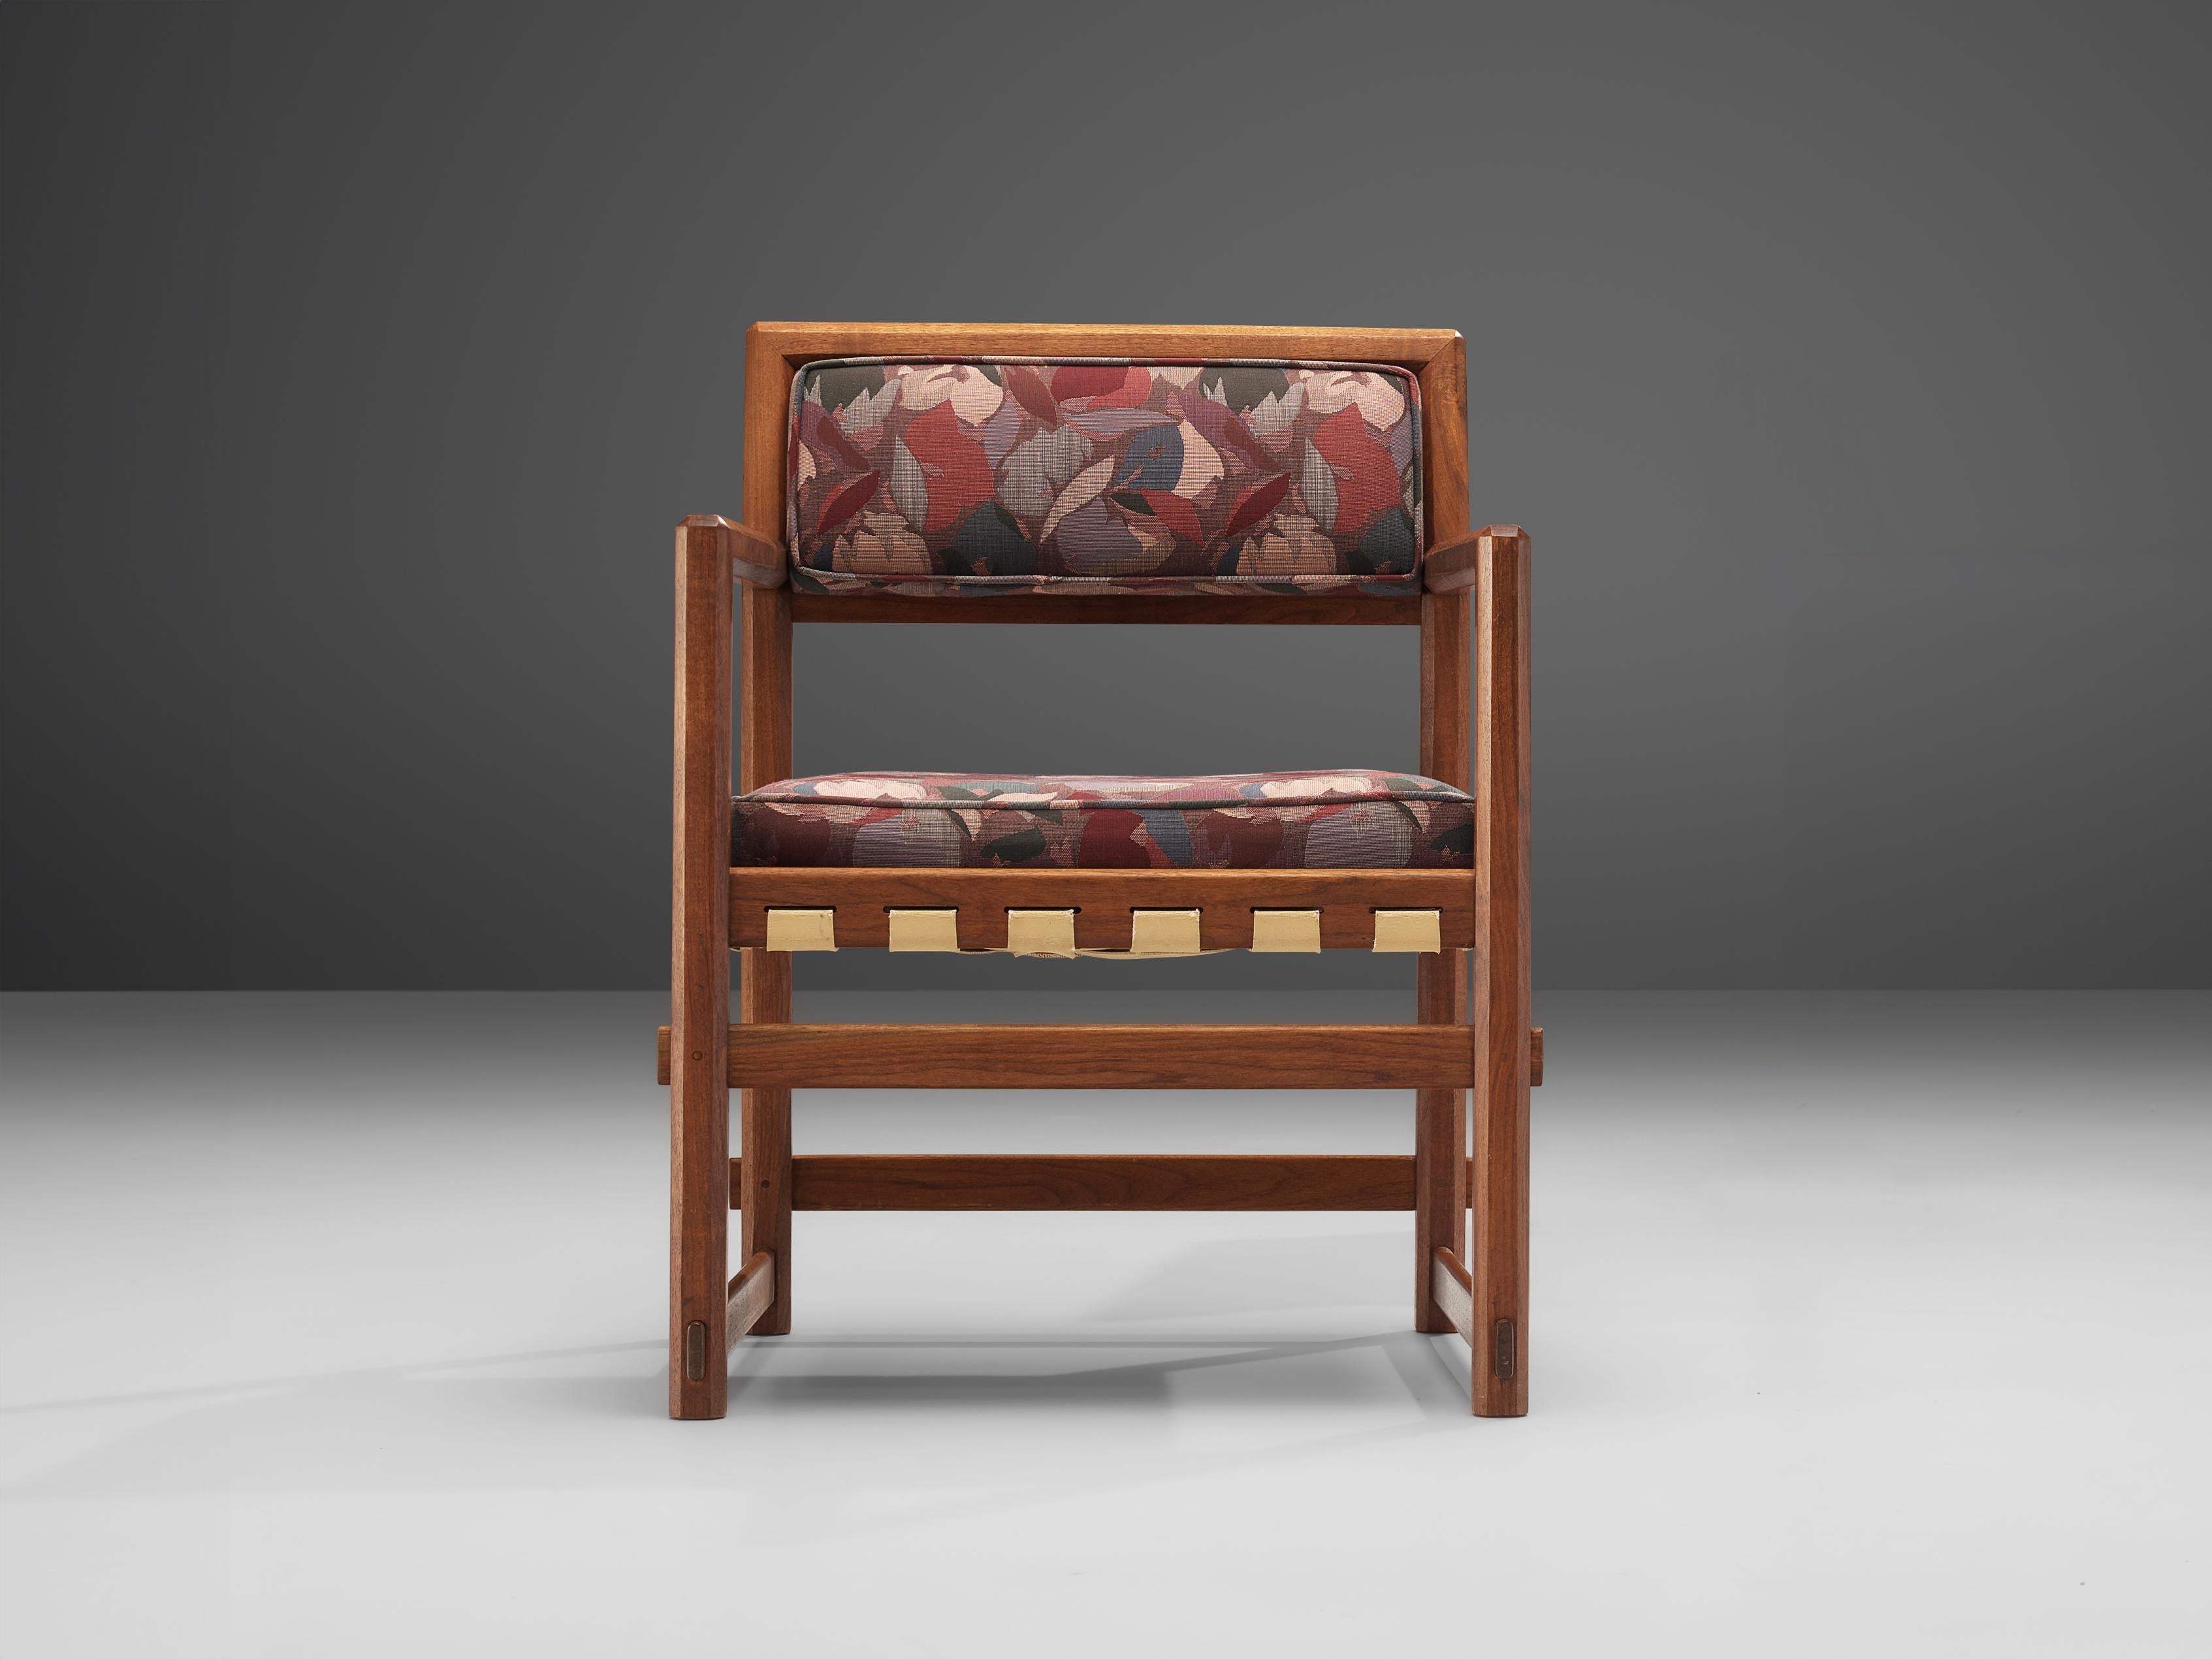 Edward Wormley for Dunbar Armchair in Patterned Upholstery and Teak